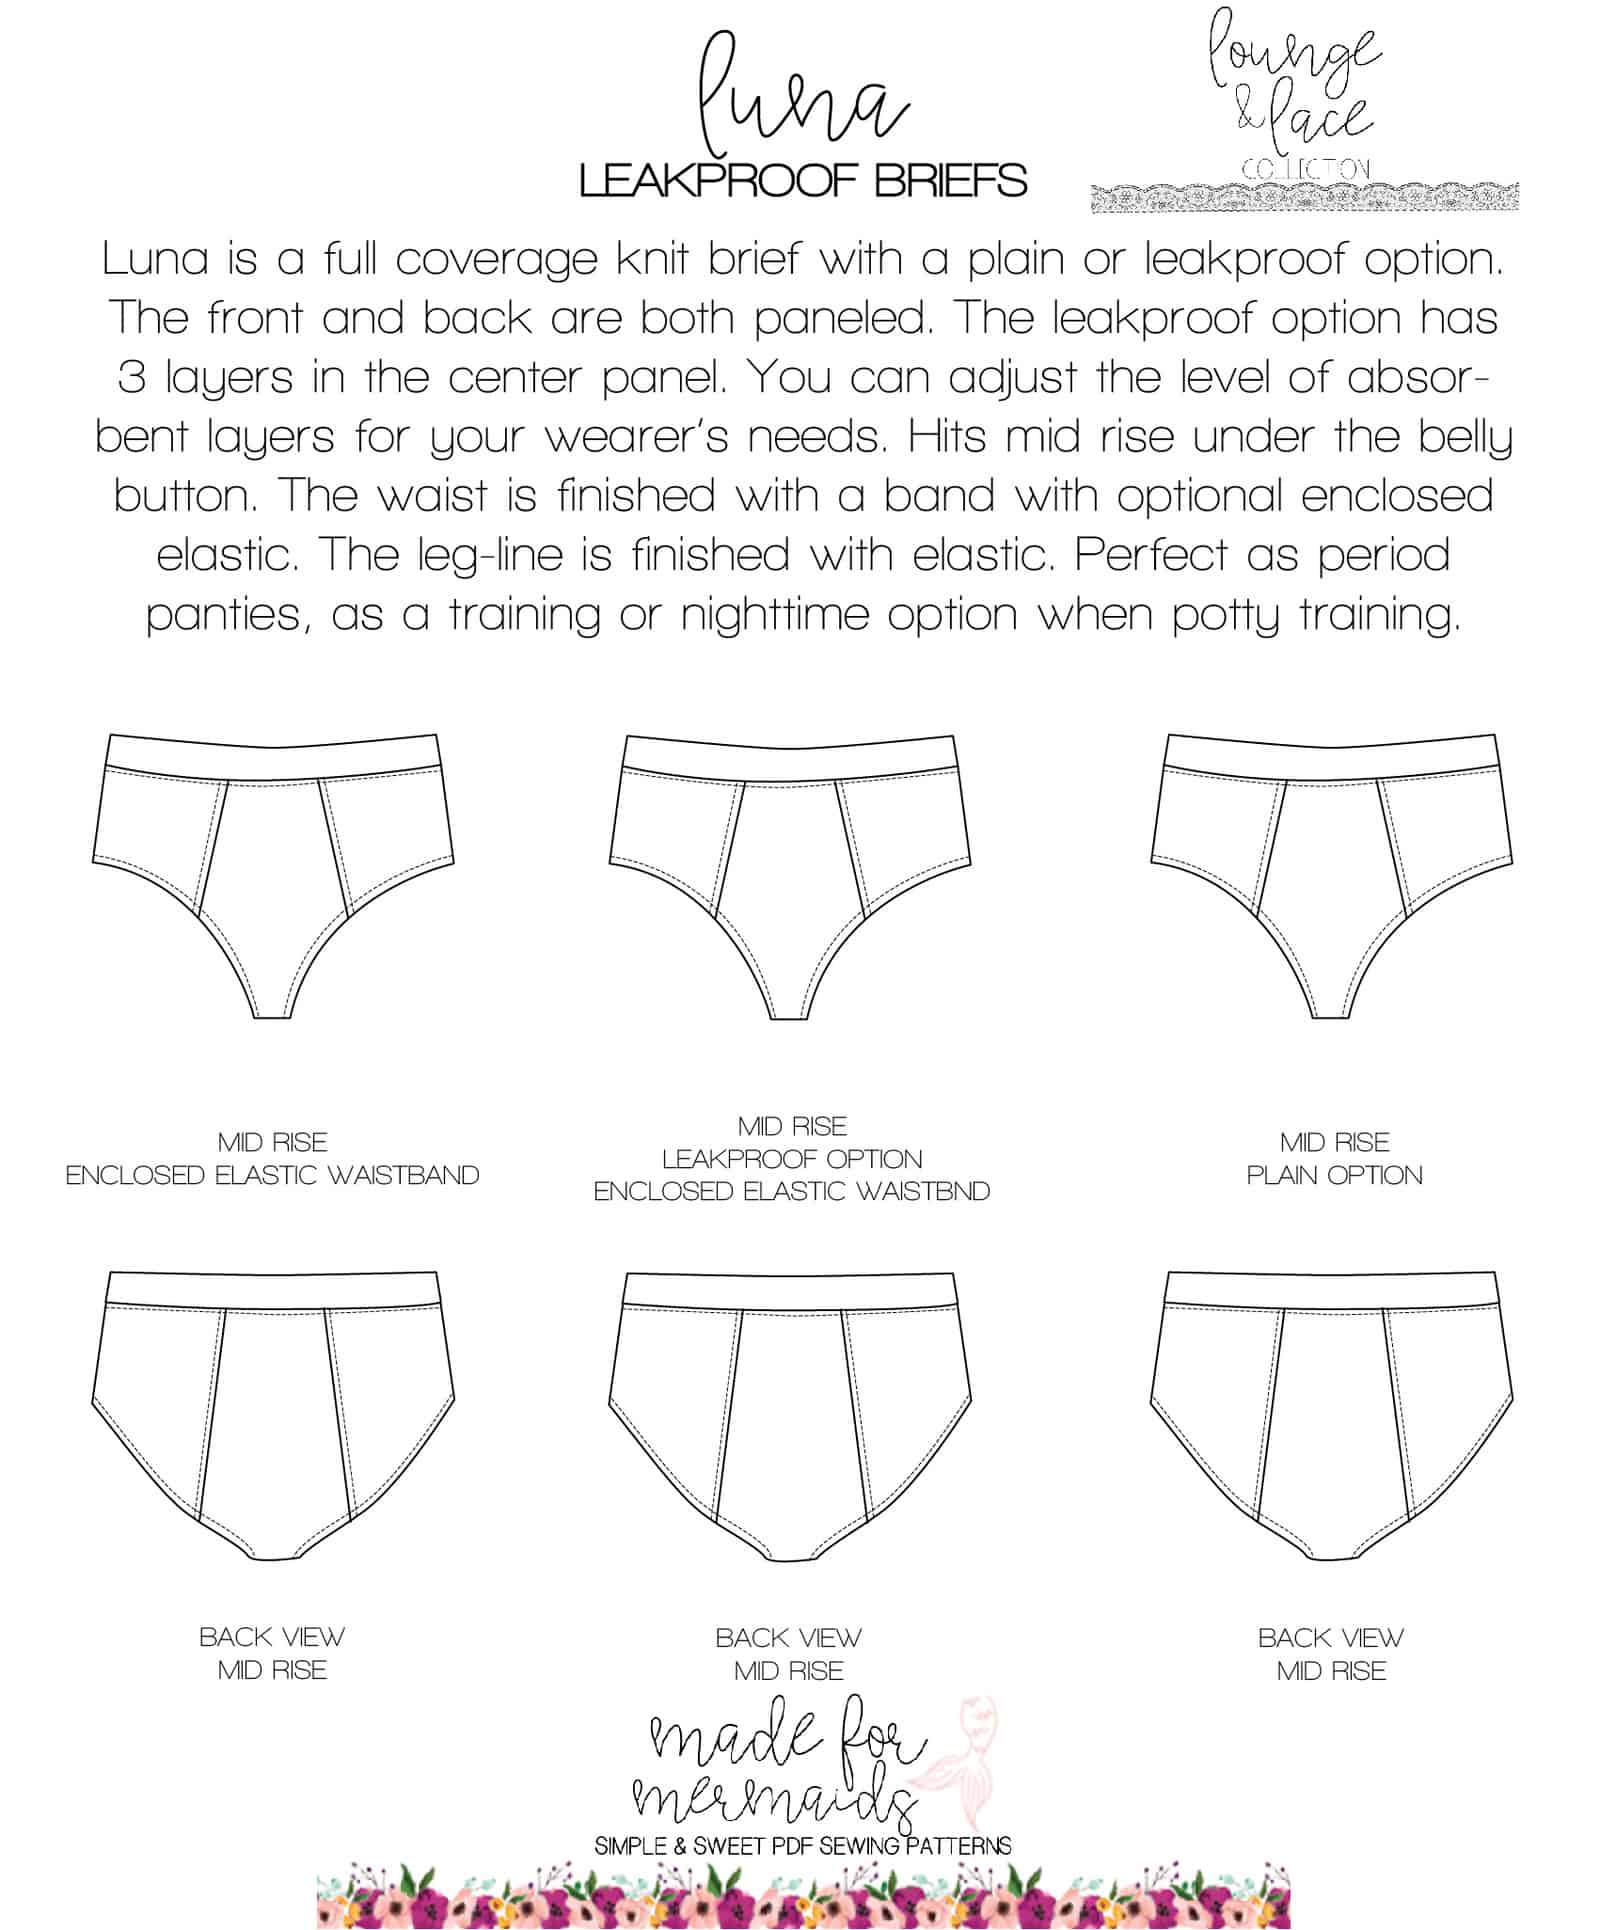 Lounge & Lace Collection- Youth Luna Leakproof Briefs